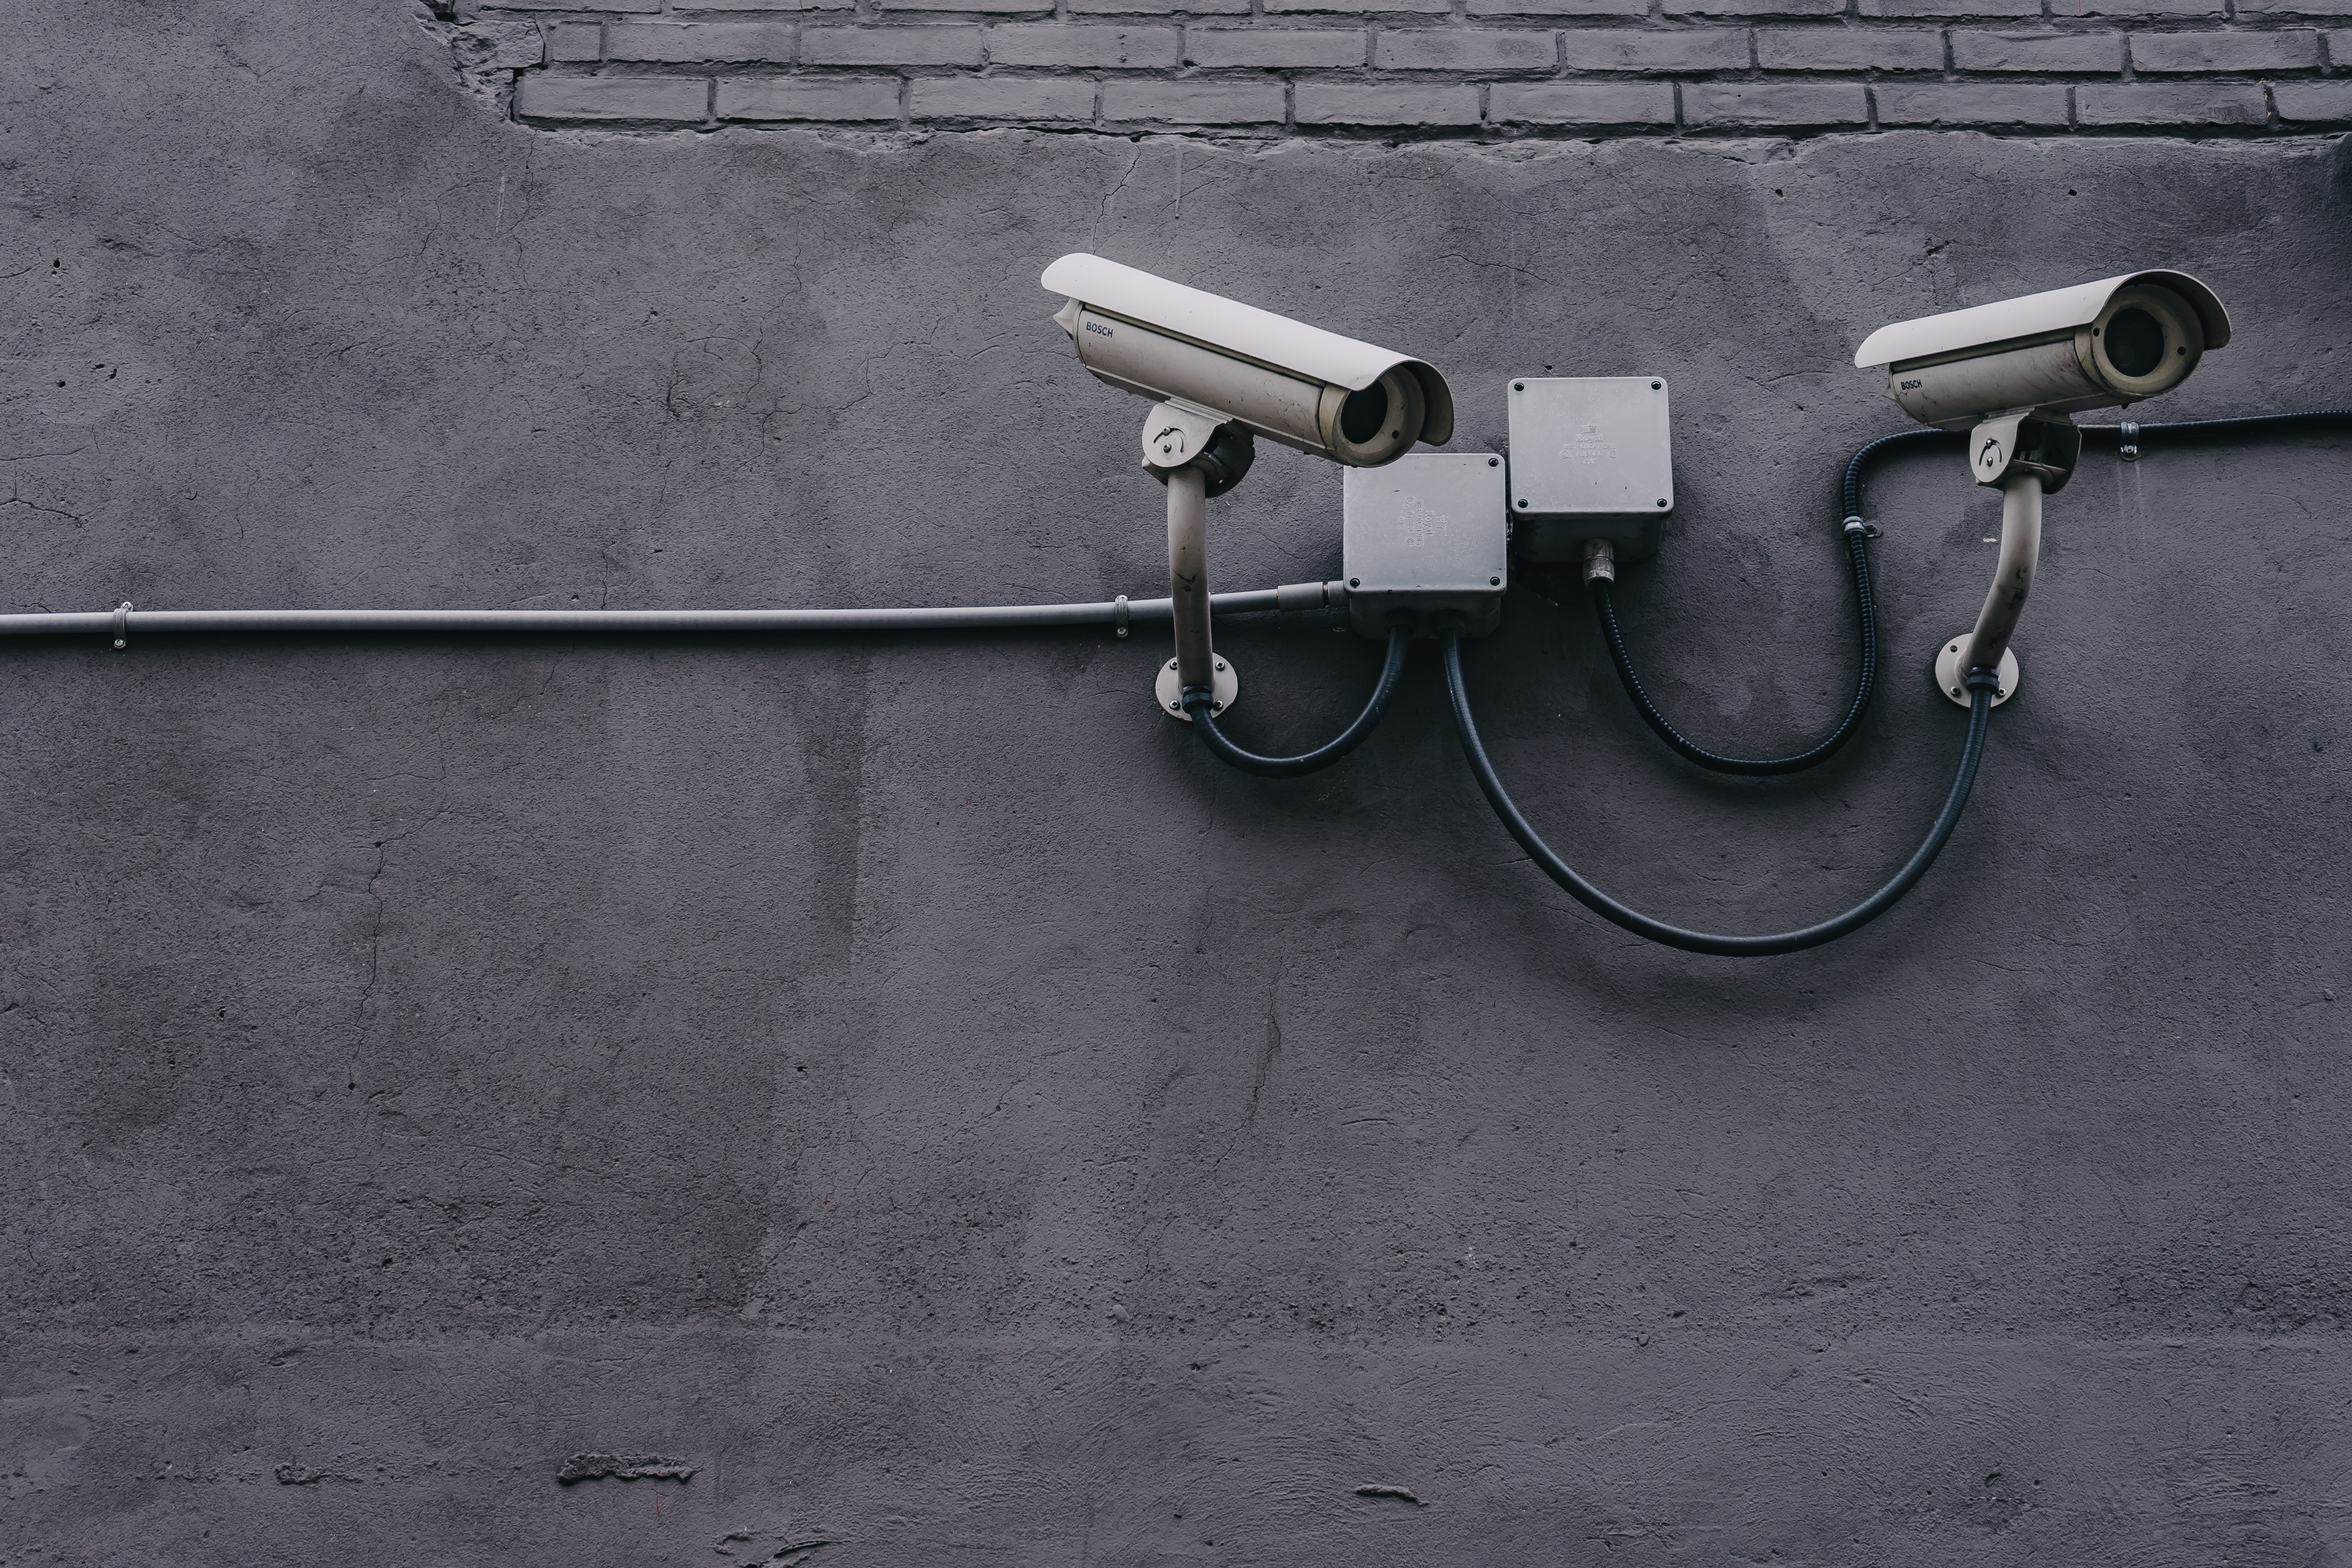 Here’s 5 reasons you should have CCTV installed at your commercial property